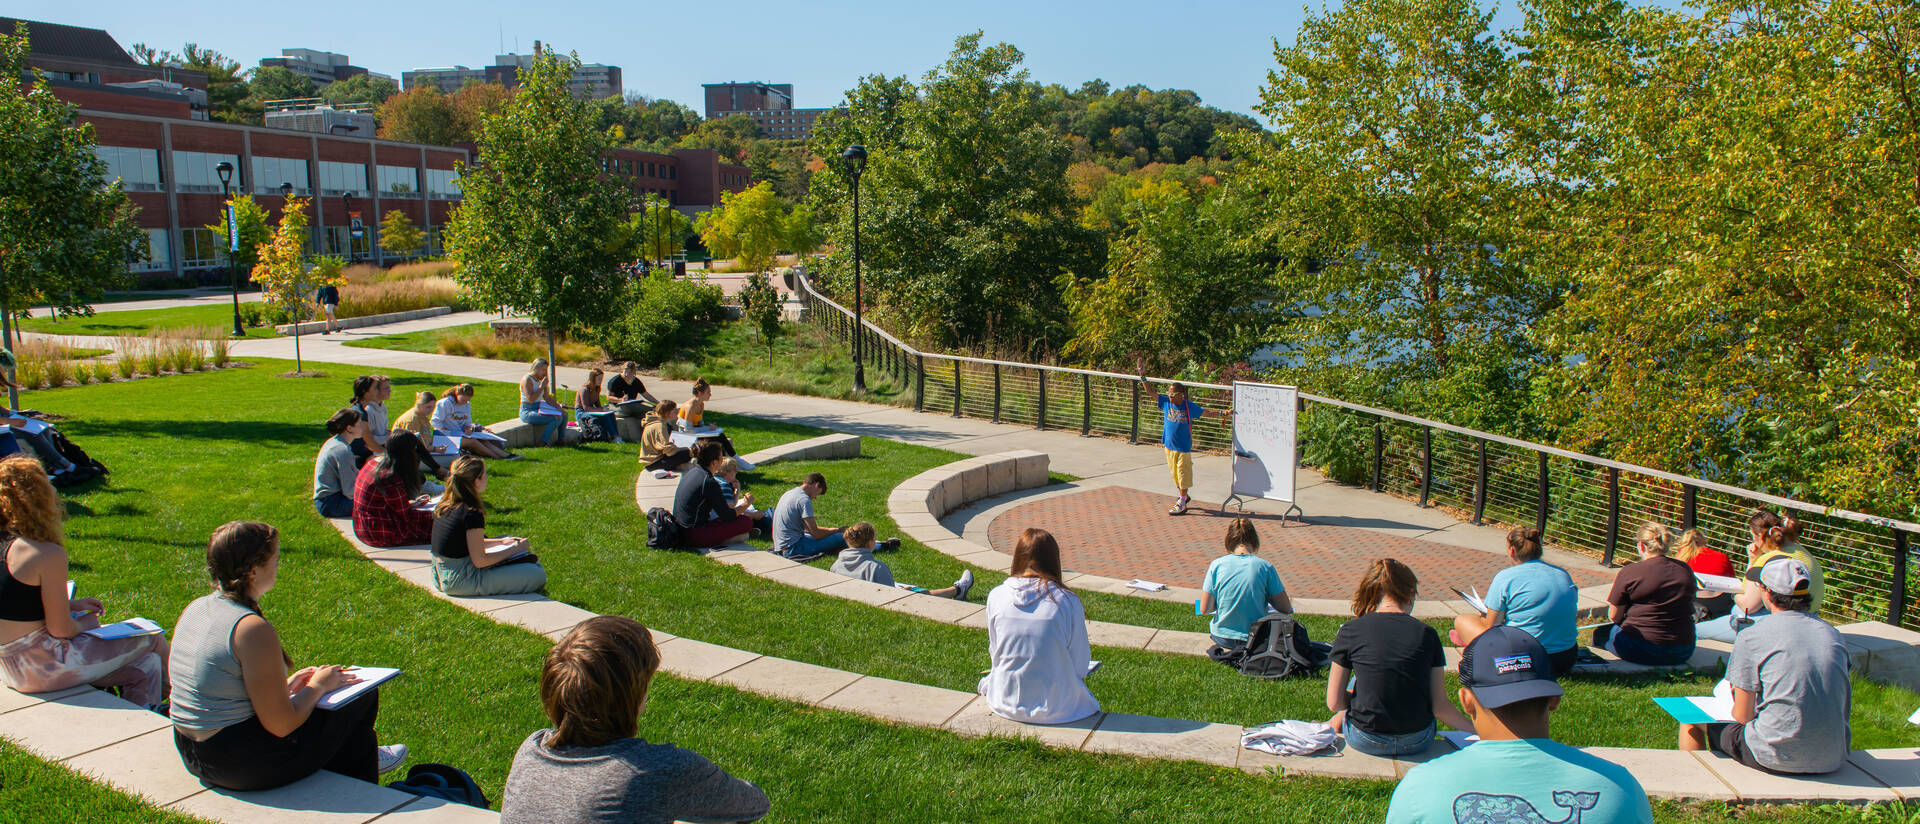 Outdoor classroom taking place on outdoor seating facing the river